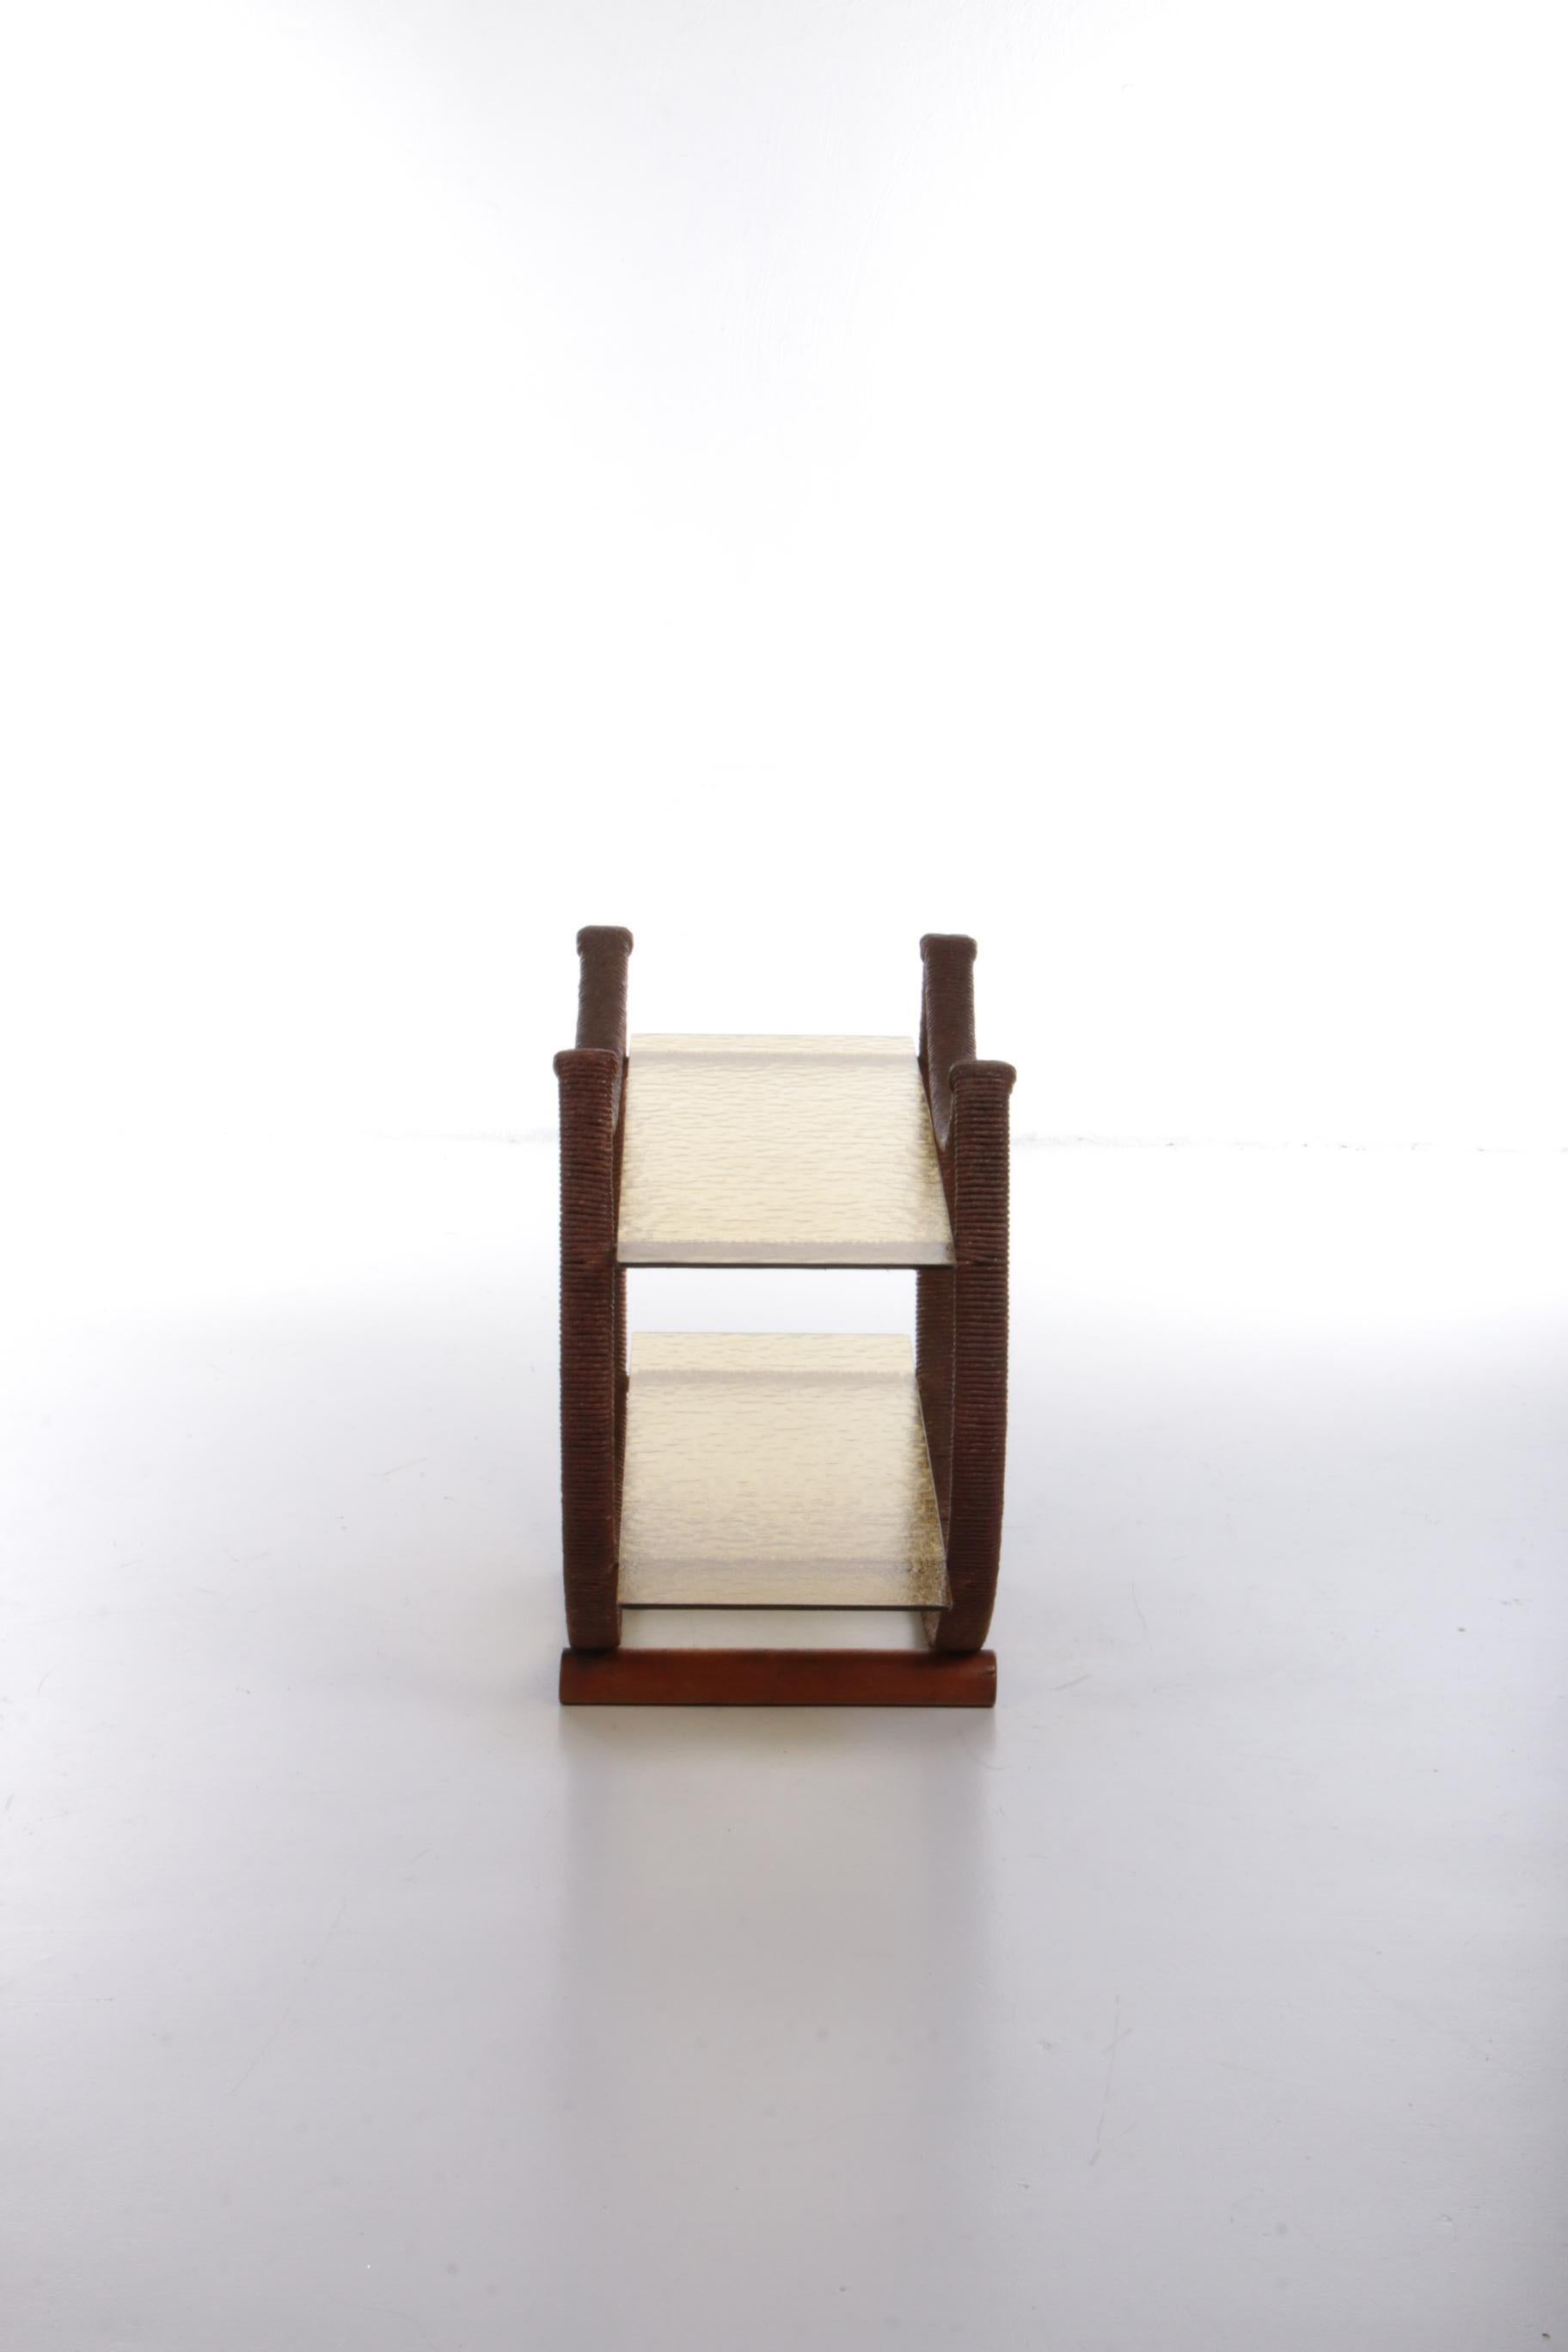 Jute Rare Danish Side Table with Original Glass, 1960s For Sale